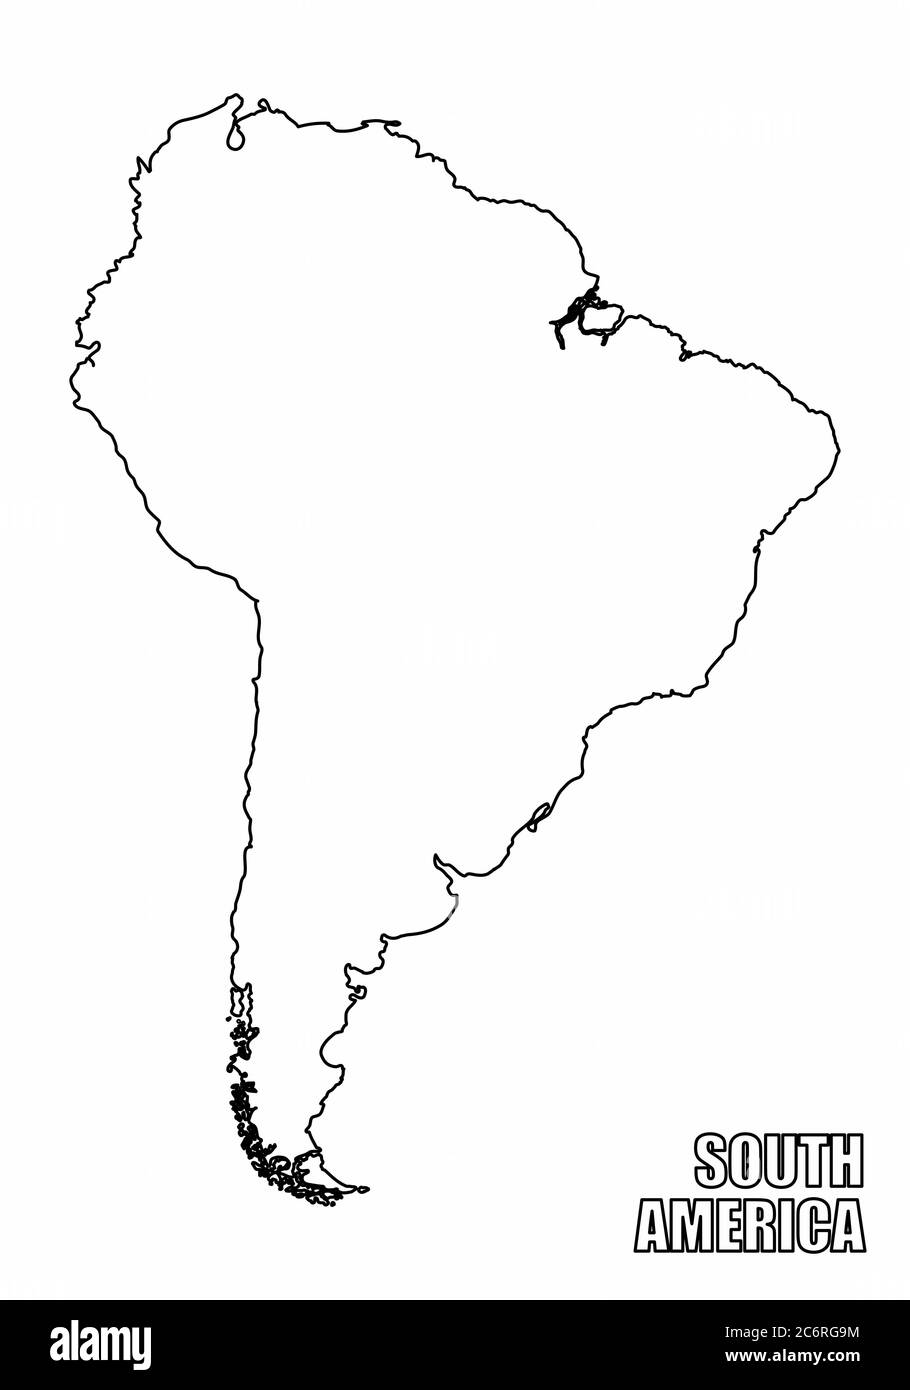 South America outline map Stock Vector